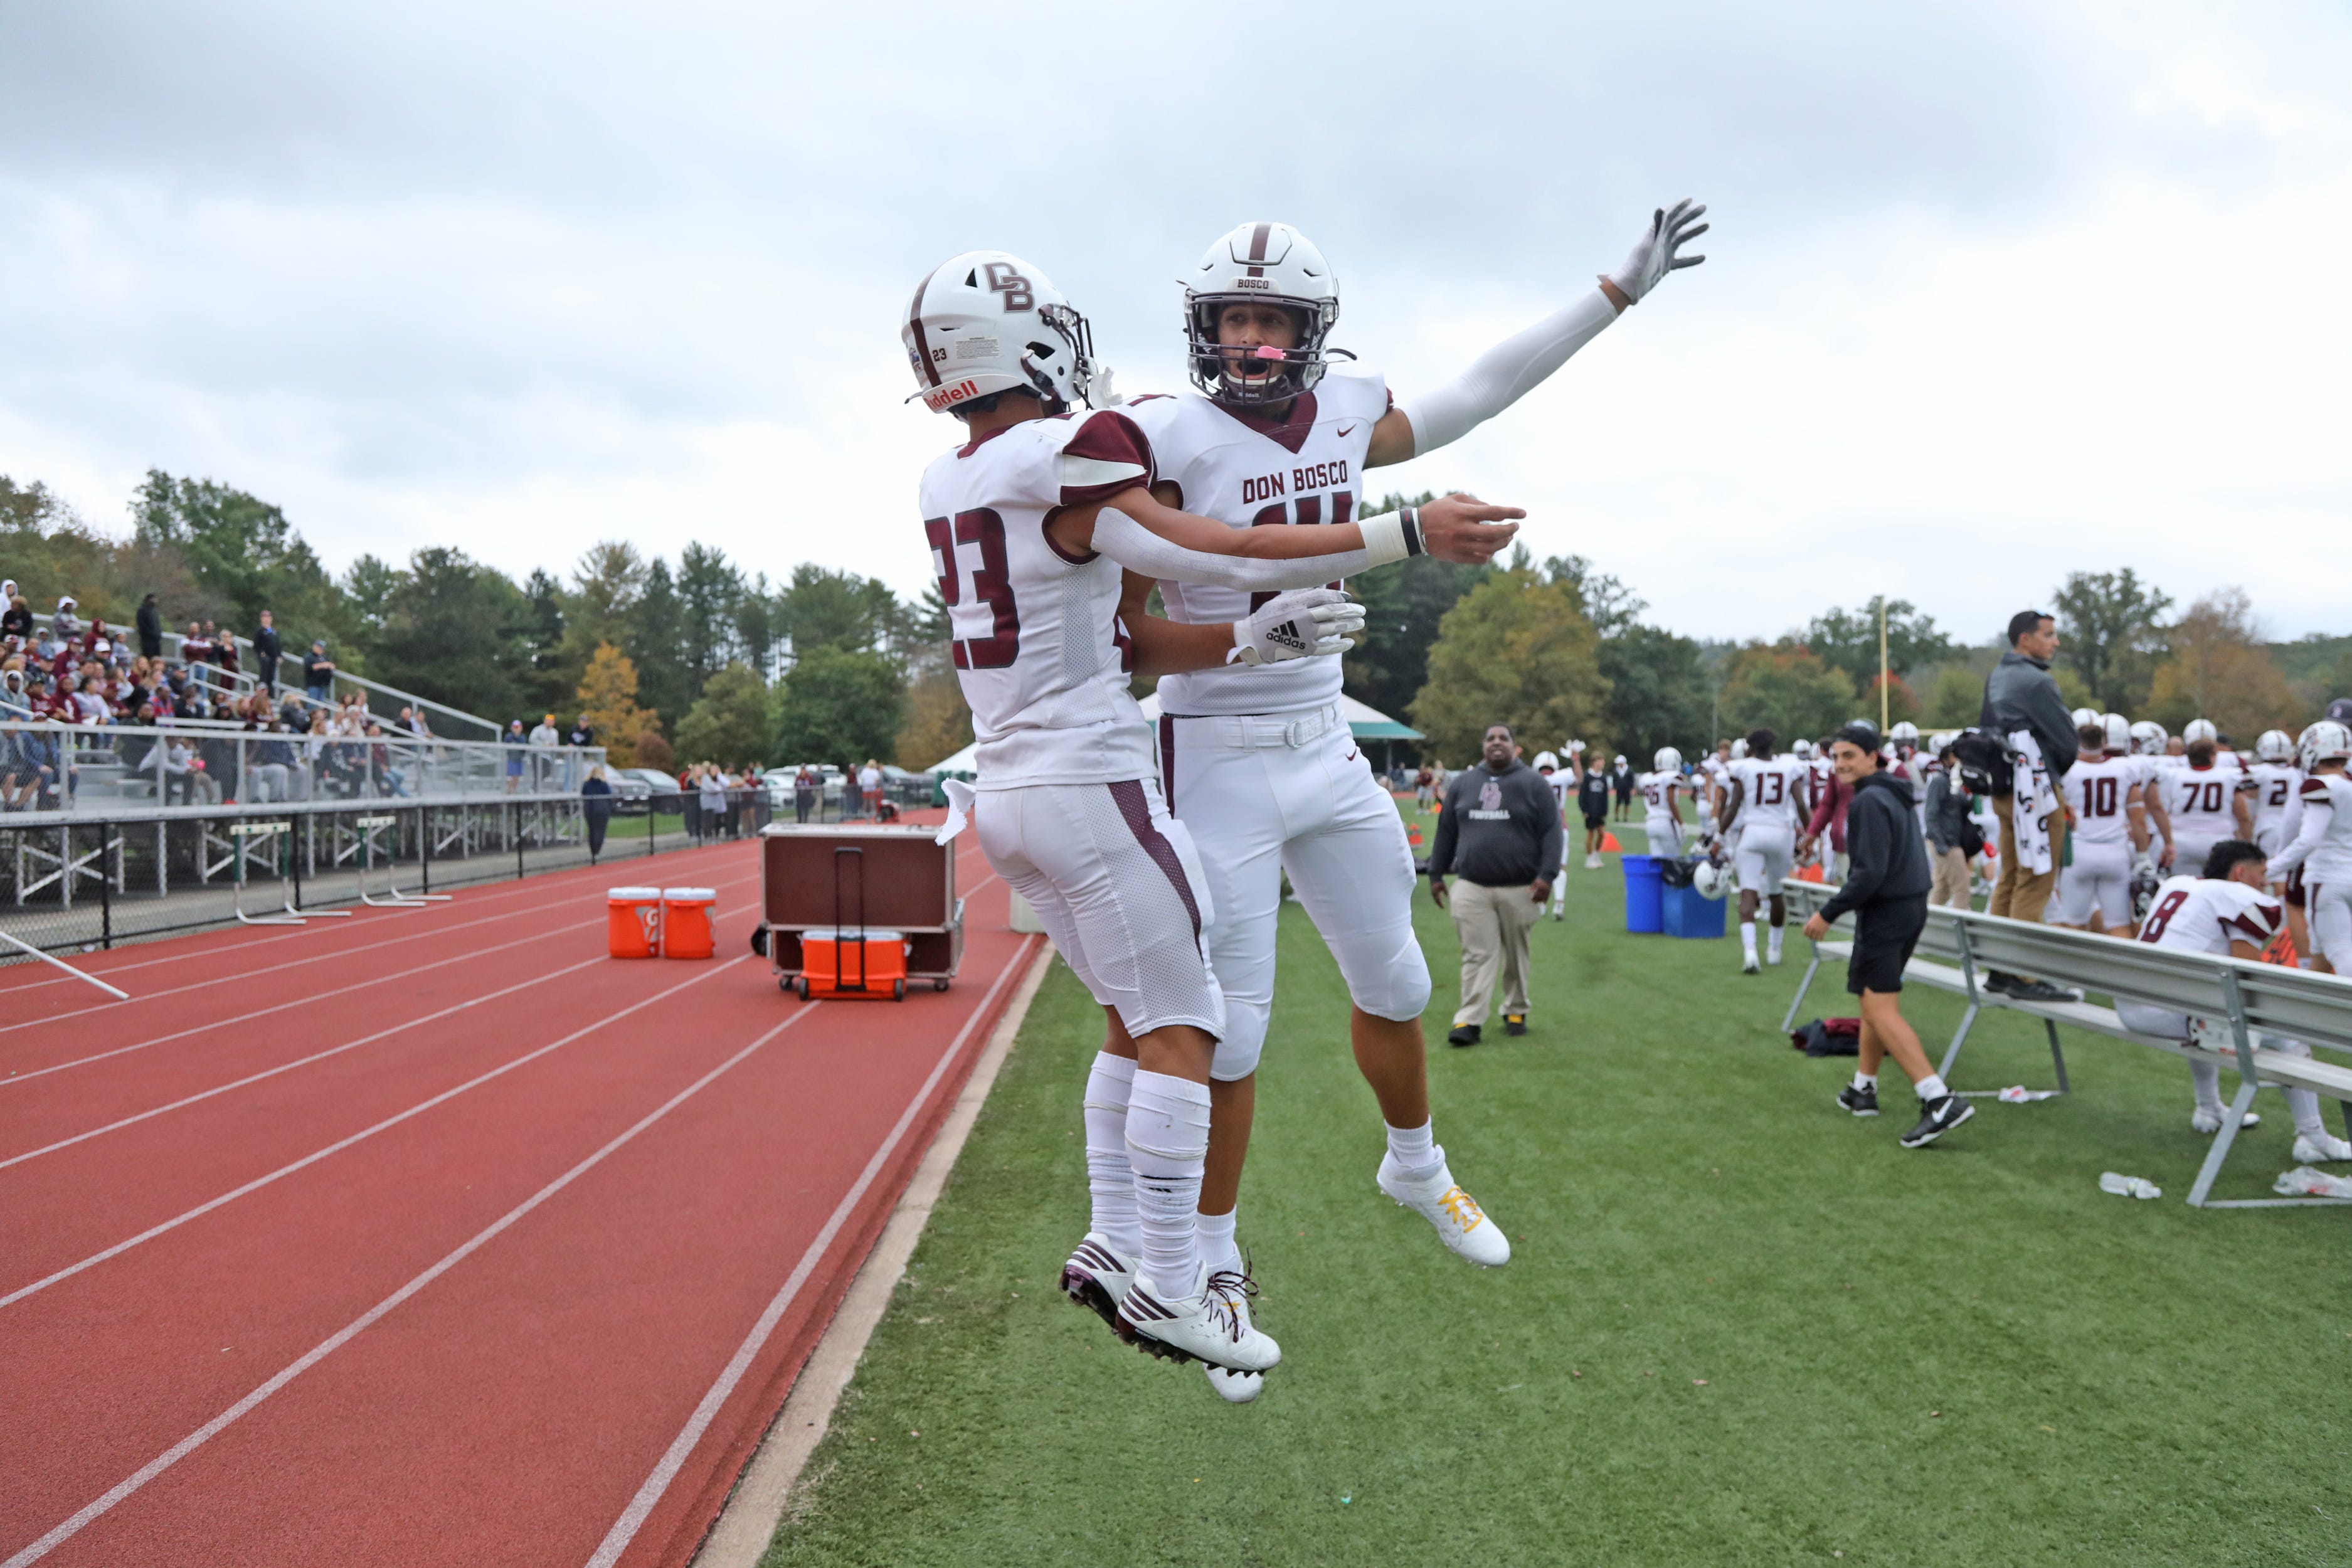 Don Bosco NJ football Schedule includes first Florida trip in 6 years